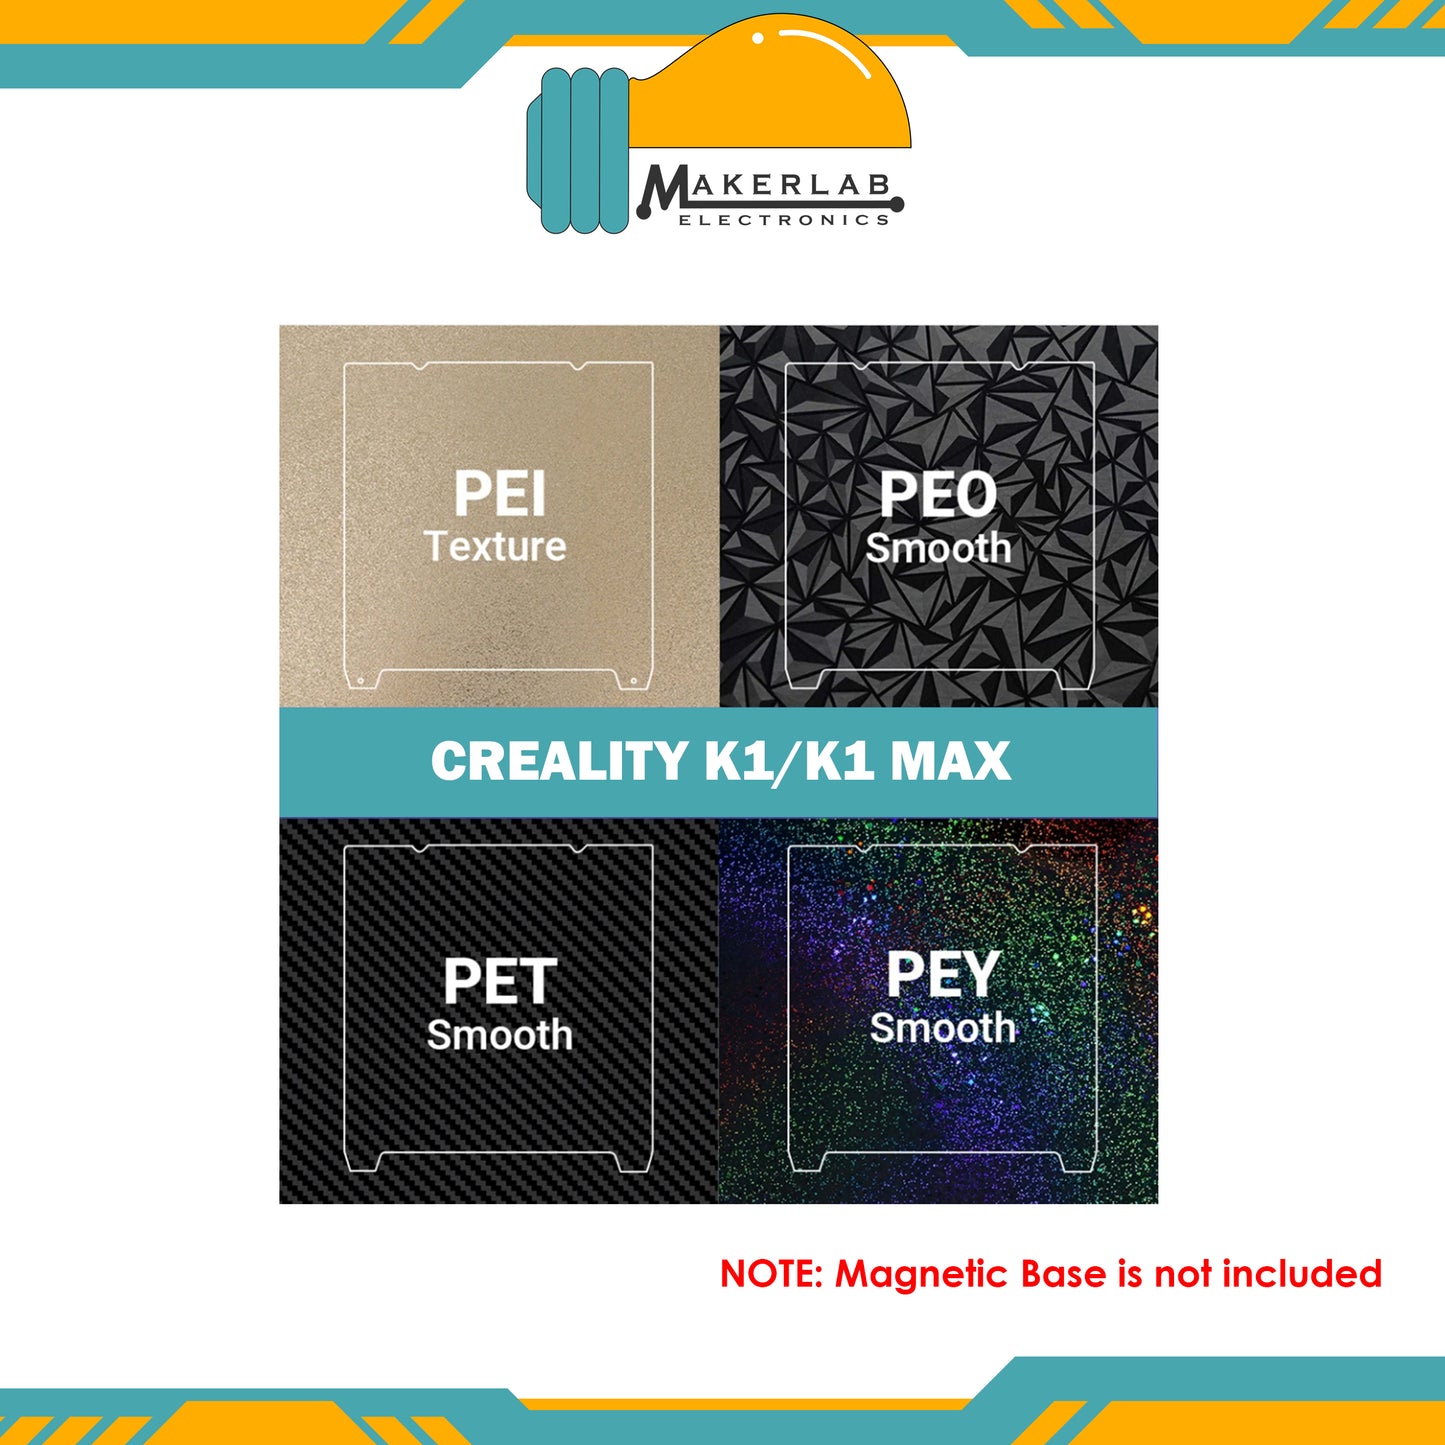 Creality K1 l K1 Max Build Plate PEI PEO PET PEY Double-Sided Printing Heated Bed (Without Magnetic Bed)